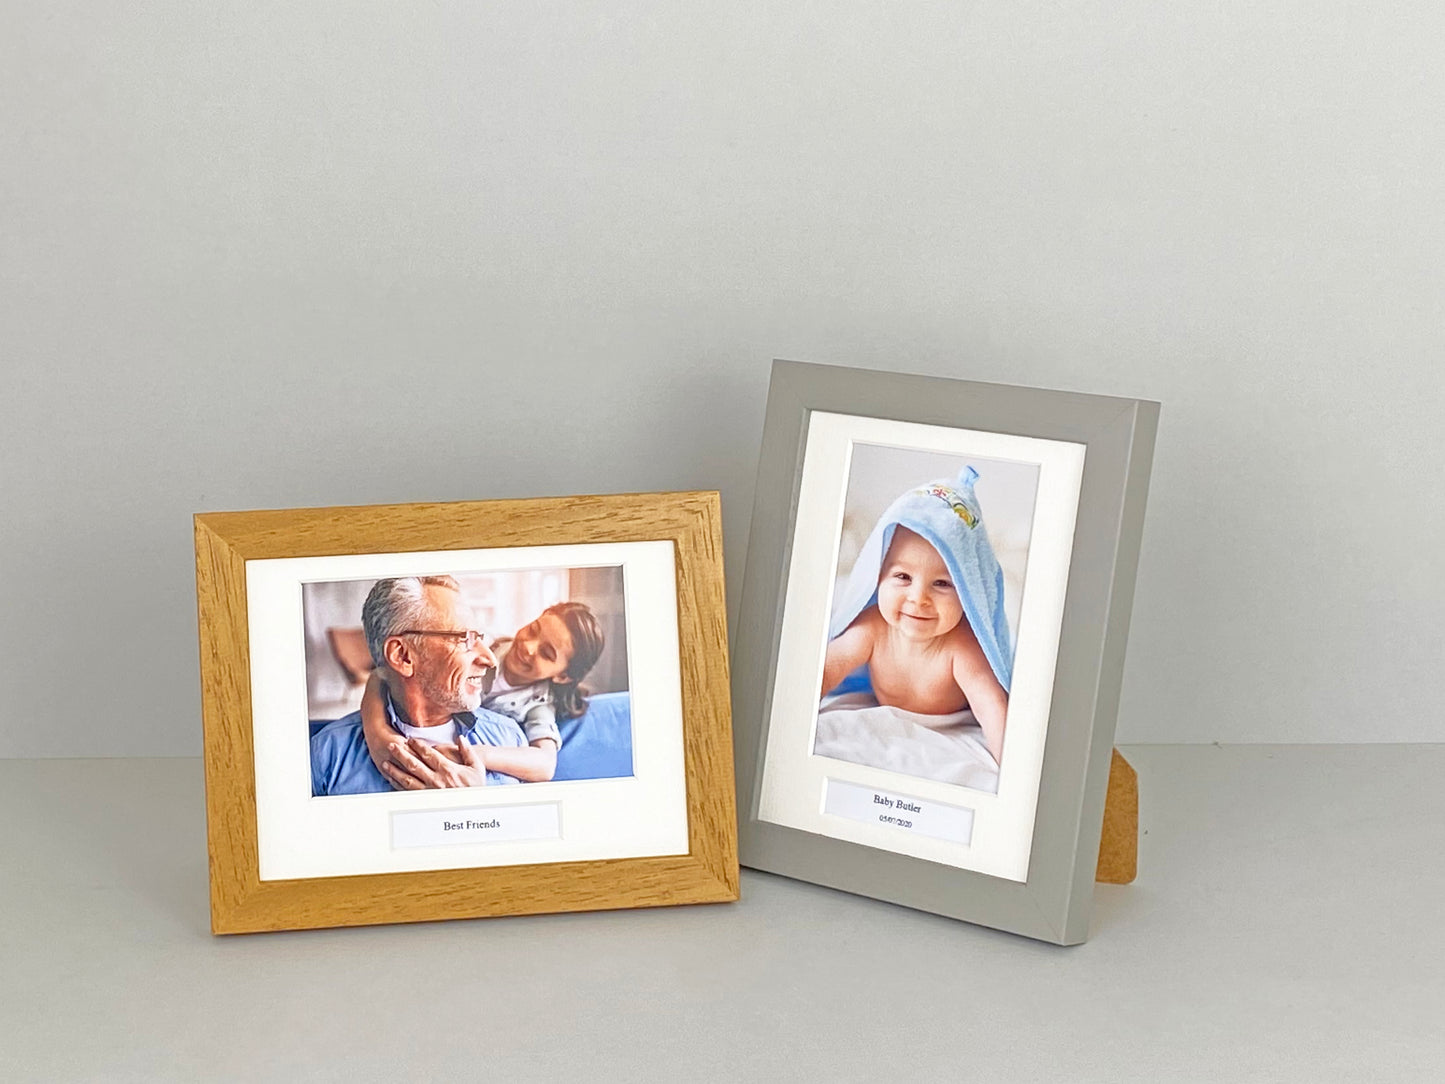 Personalised Mini Caption Frames. 8x6" Frame with 6x4" Photo. Your Text and Photo to treasure a special memory. Handmade by Art@Home in the UK - PhotoFramesandMore - Wooden Picture Frames